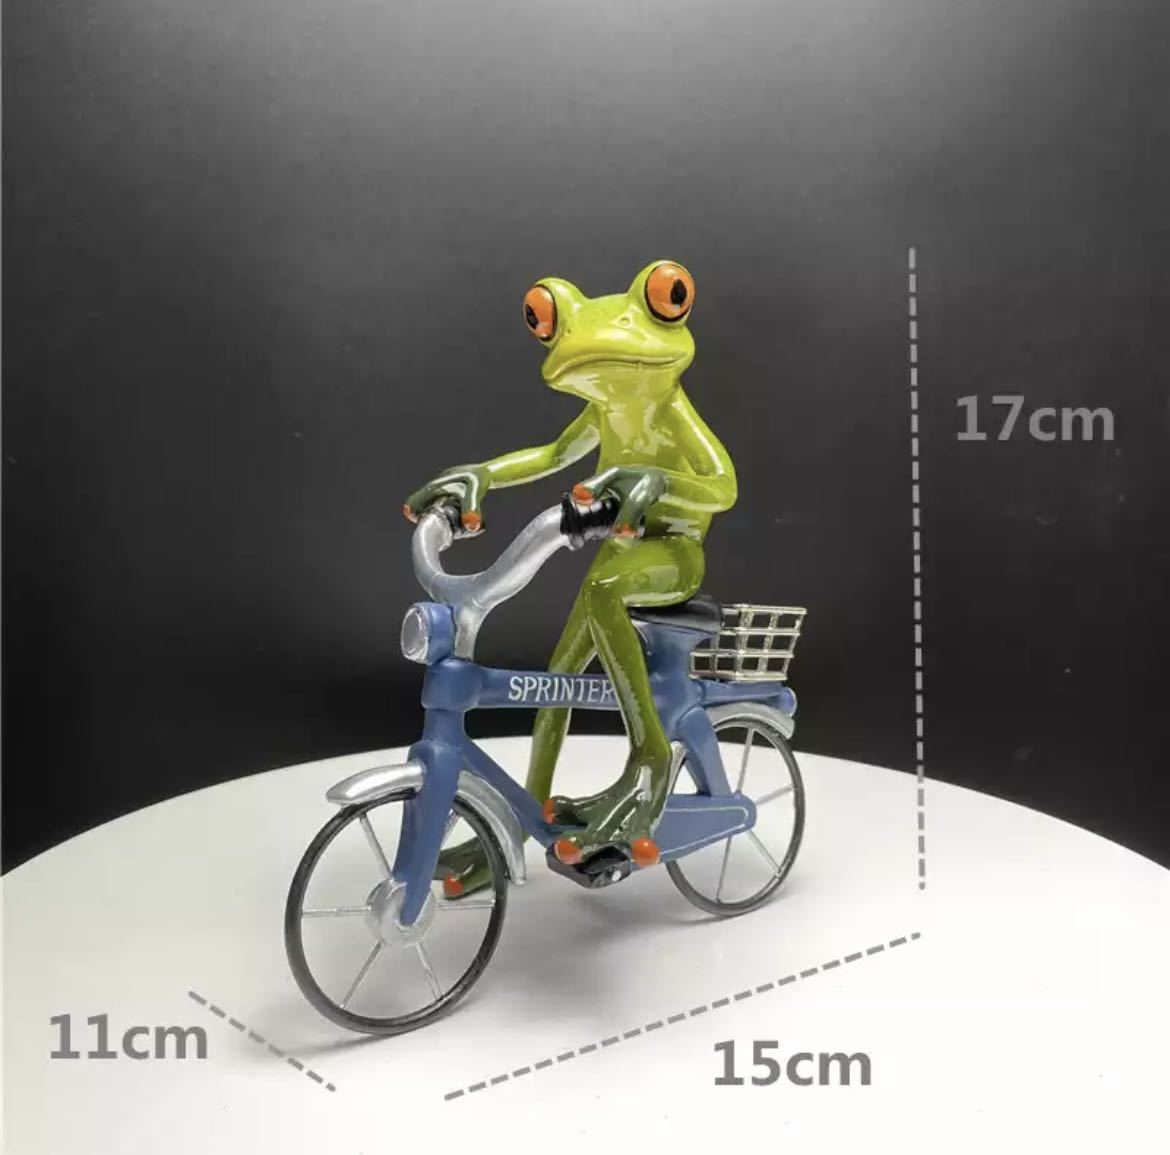  frog. ornament resin . frog figure ornament interior miscellaneous goods ornament small articles miscellaneous goods Uni -k pretty equipment ornament bicycle 1560